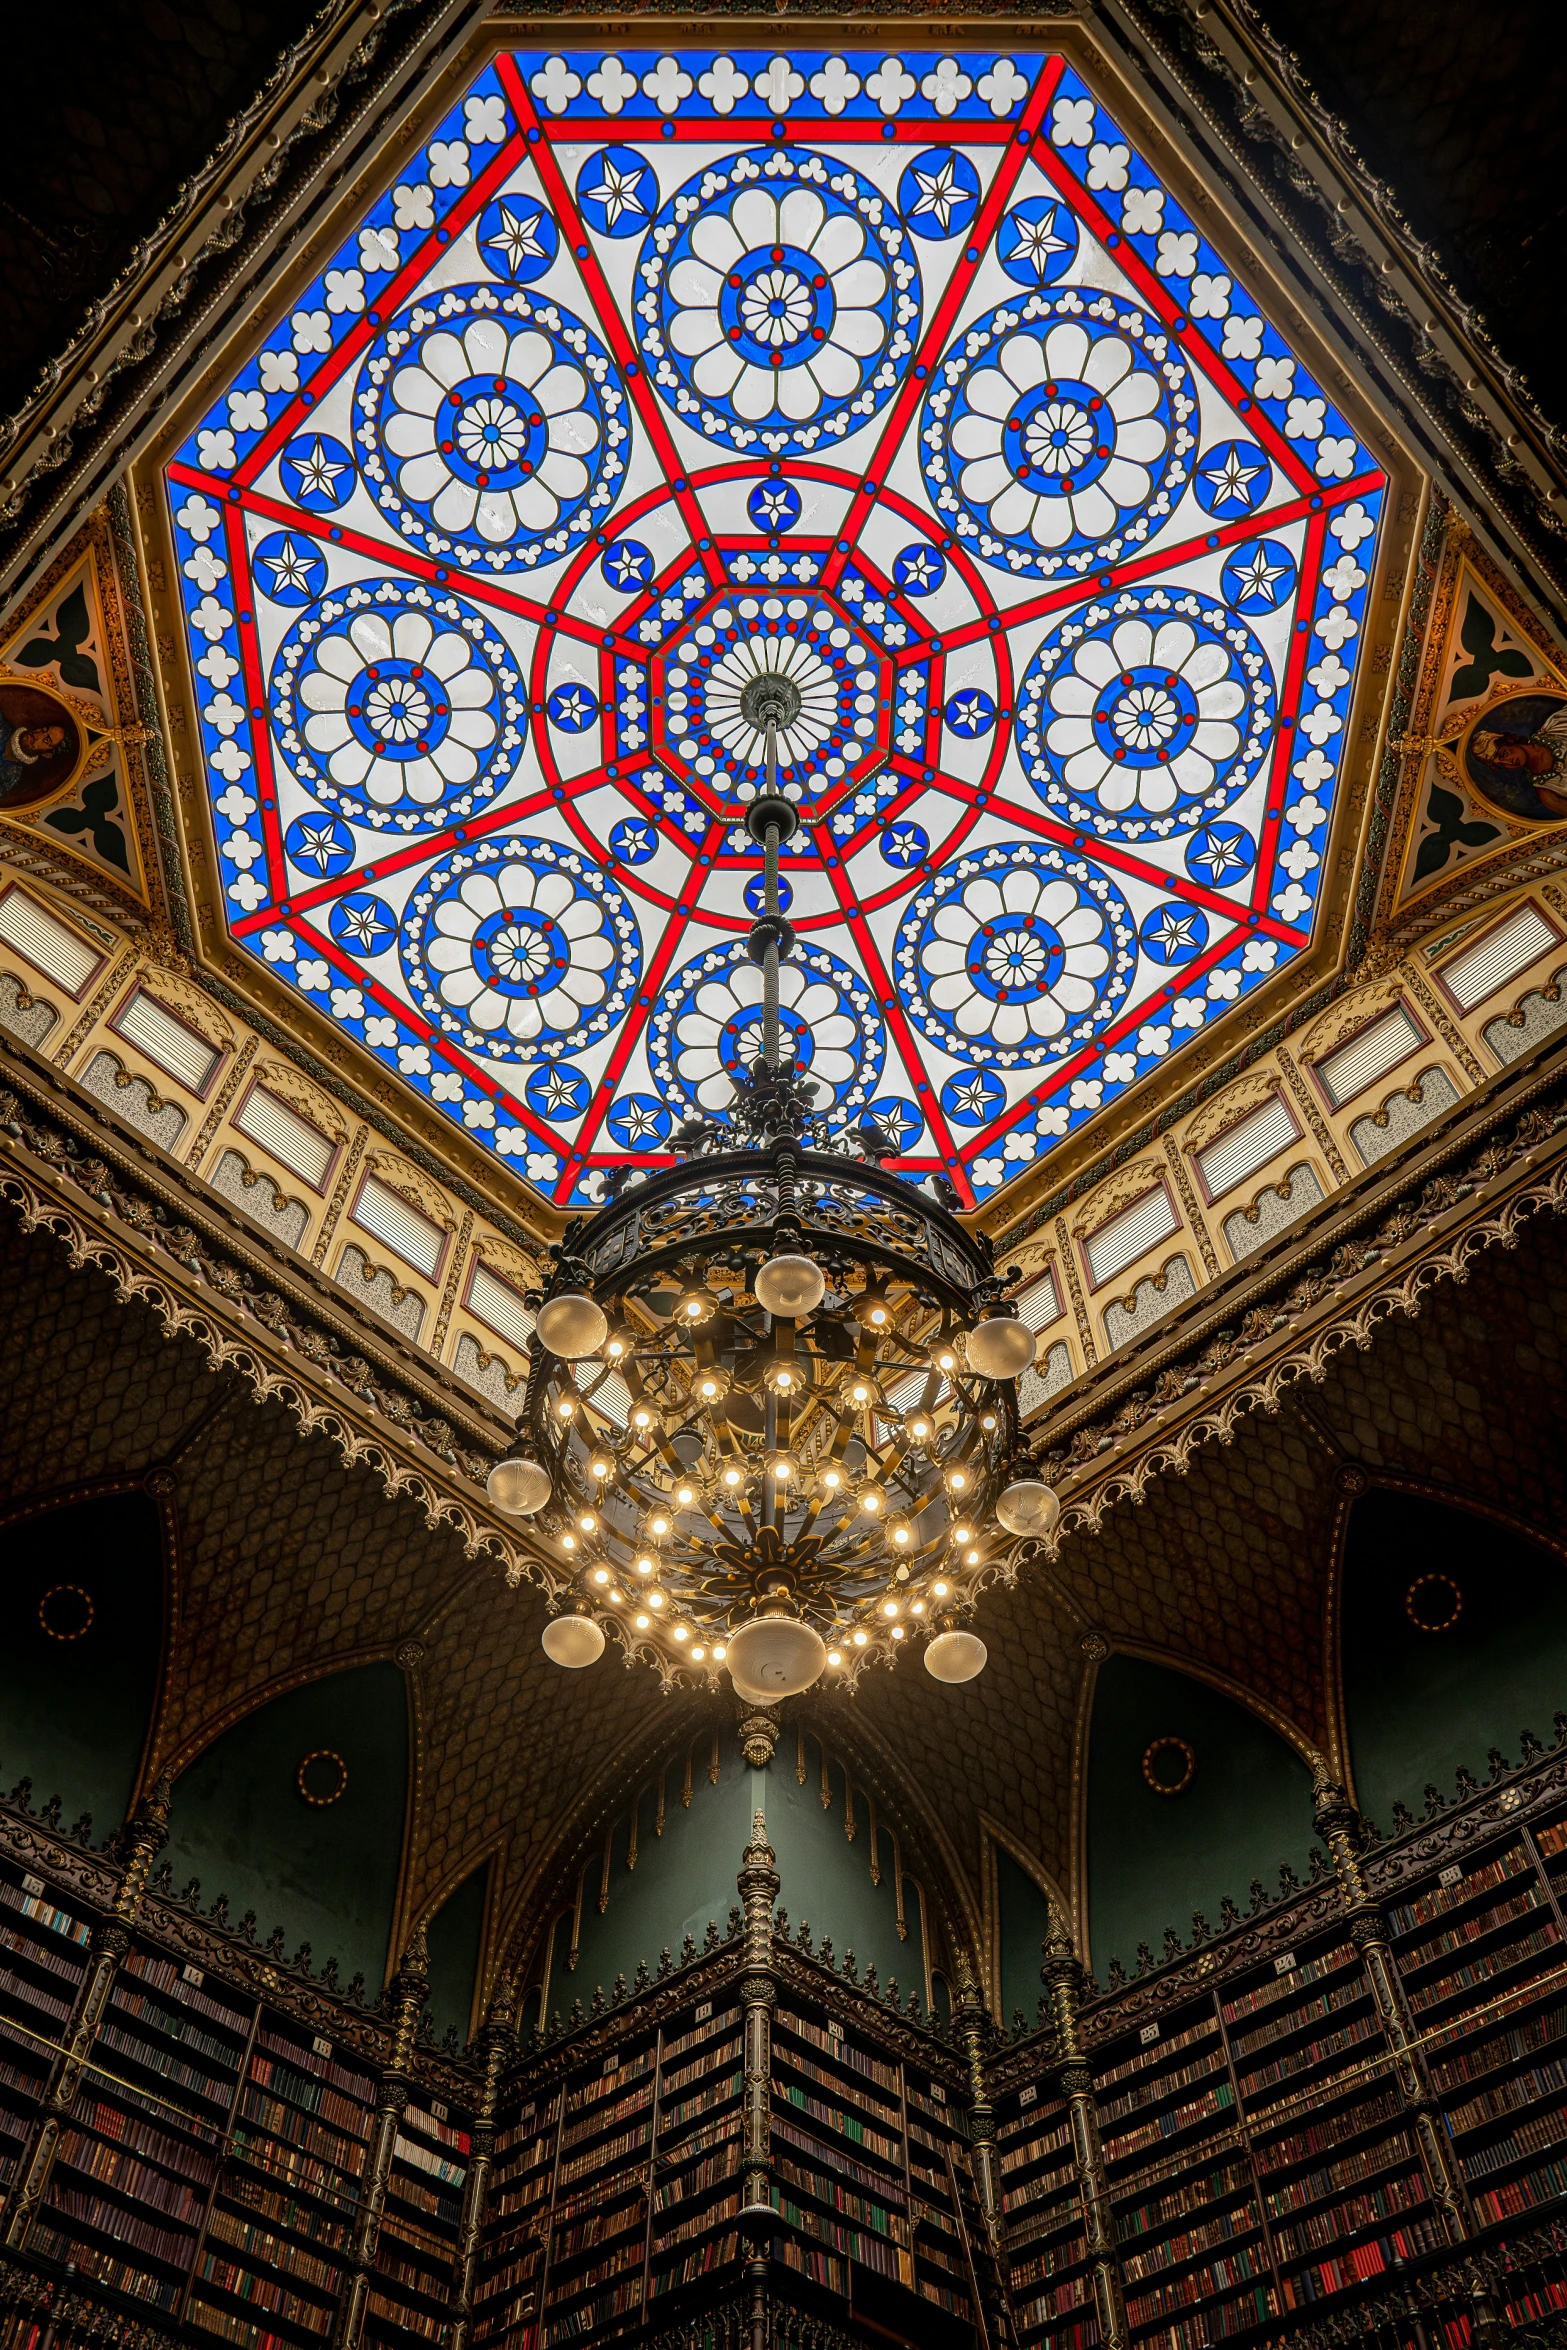 an intricate dome is shown in the middle of the ceiling